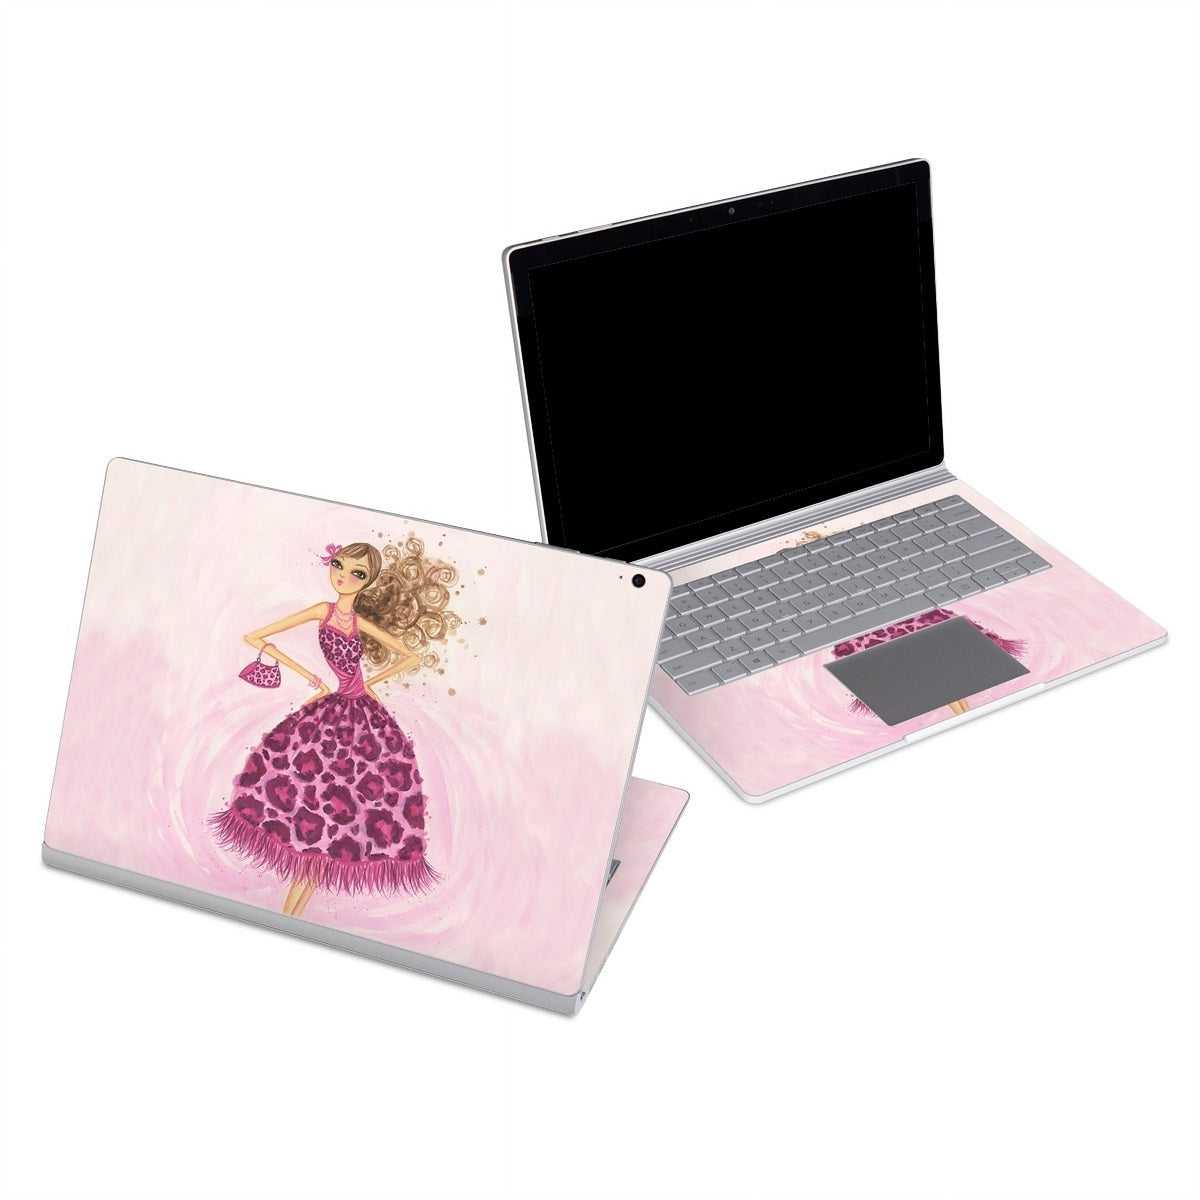 Perfectly Pink - Microsoft Surface Book Skin